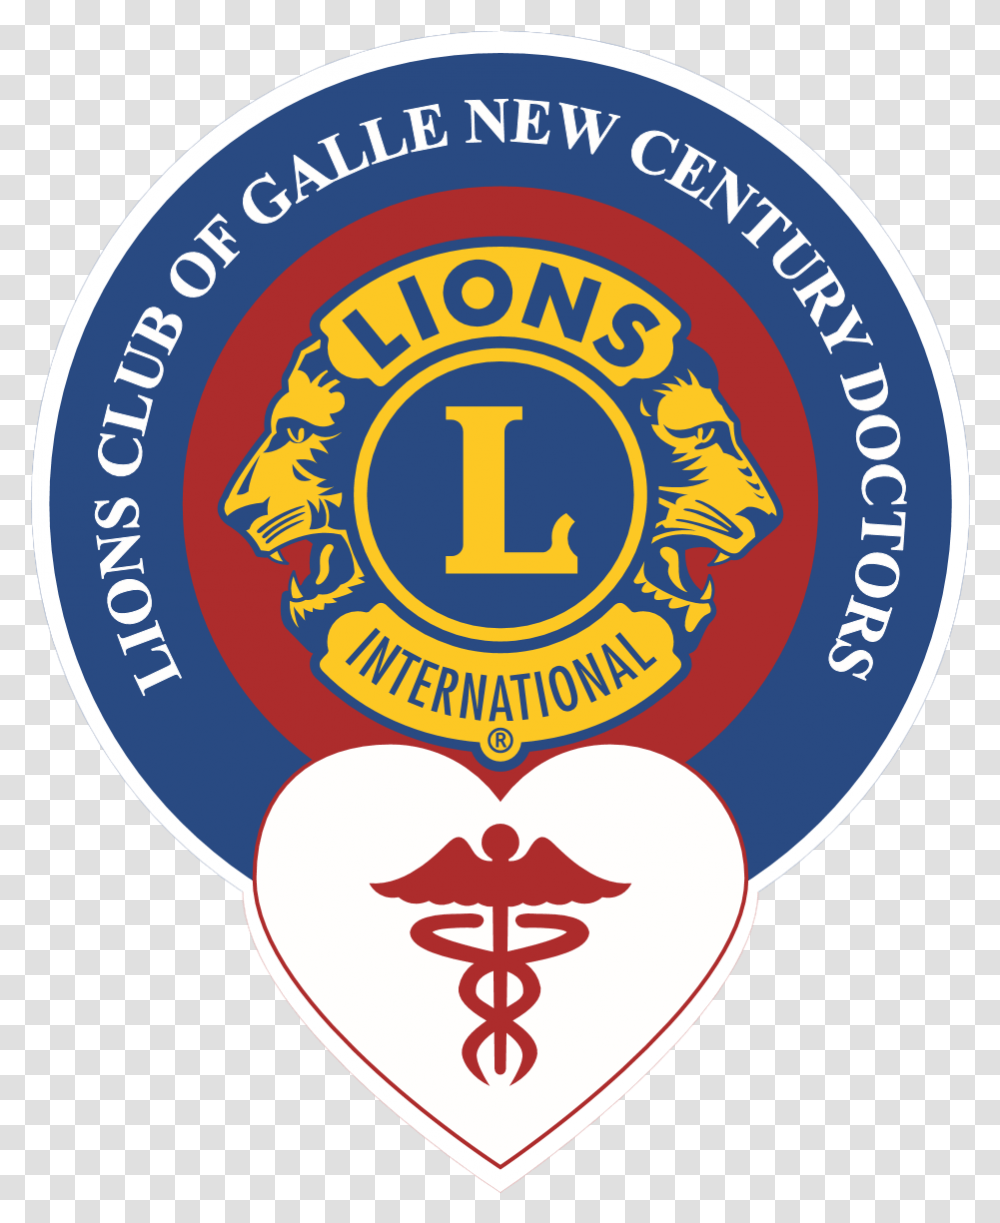 Lions Club Of Galle New Century Doctors Lions Club International, Logo, Trademark, Badge Transparent Png